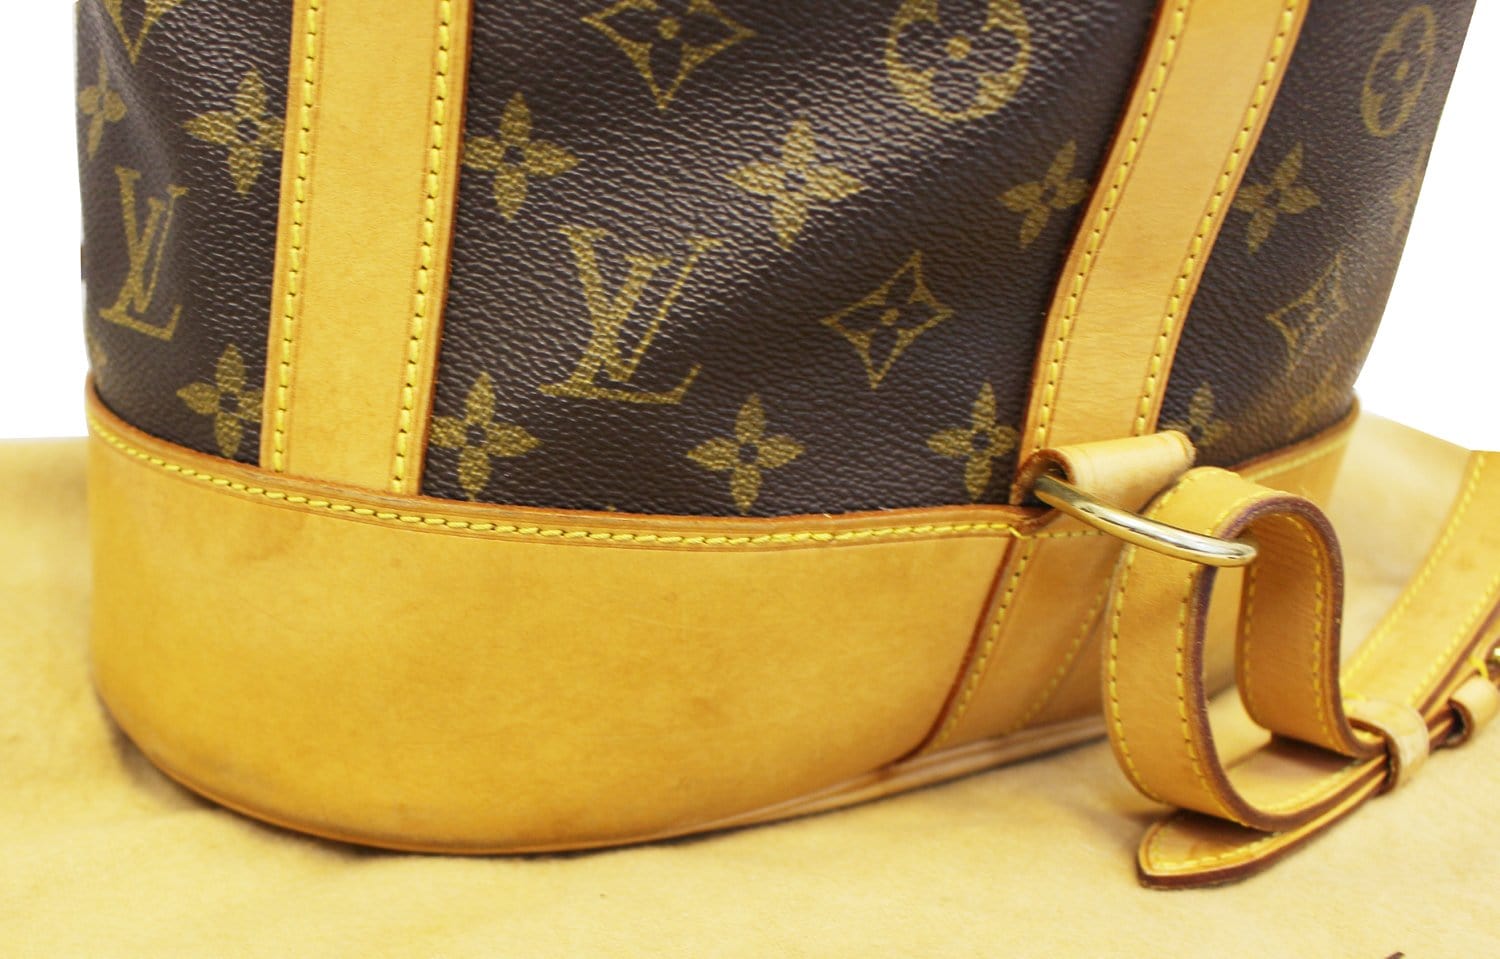 Louis Vuitton, Bags, Sold On Tradesy Louis Vuitton Palk Backpack